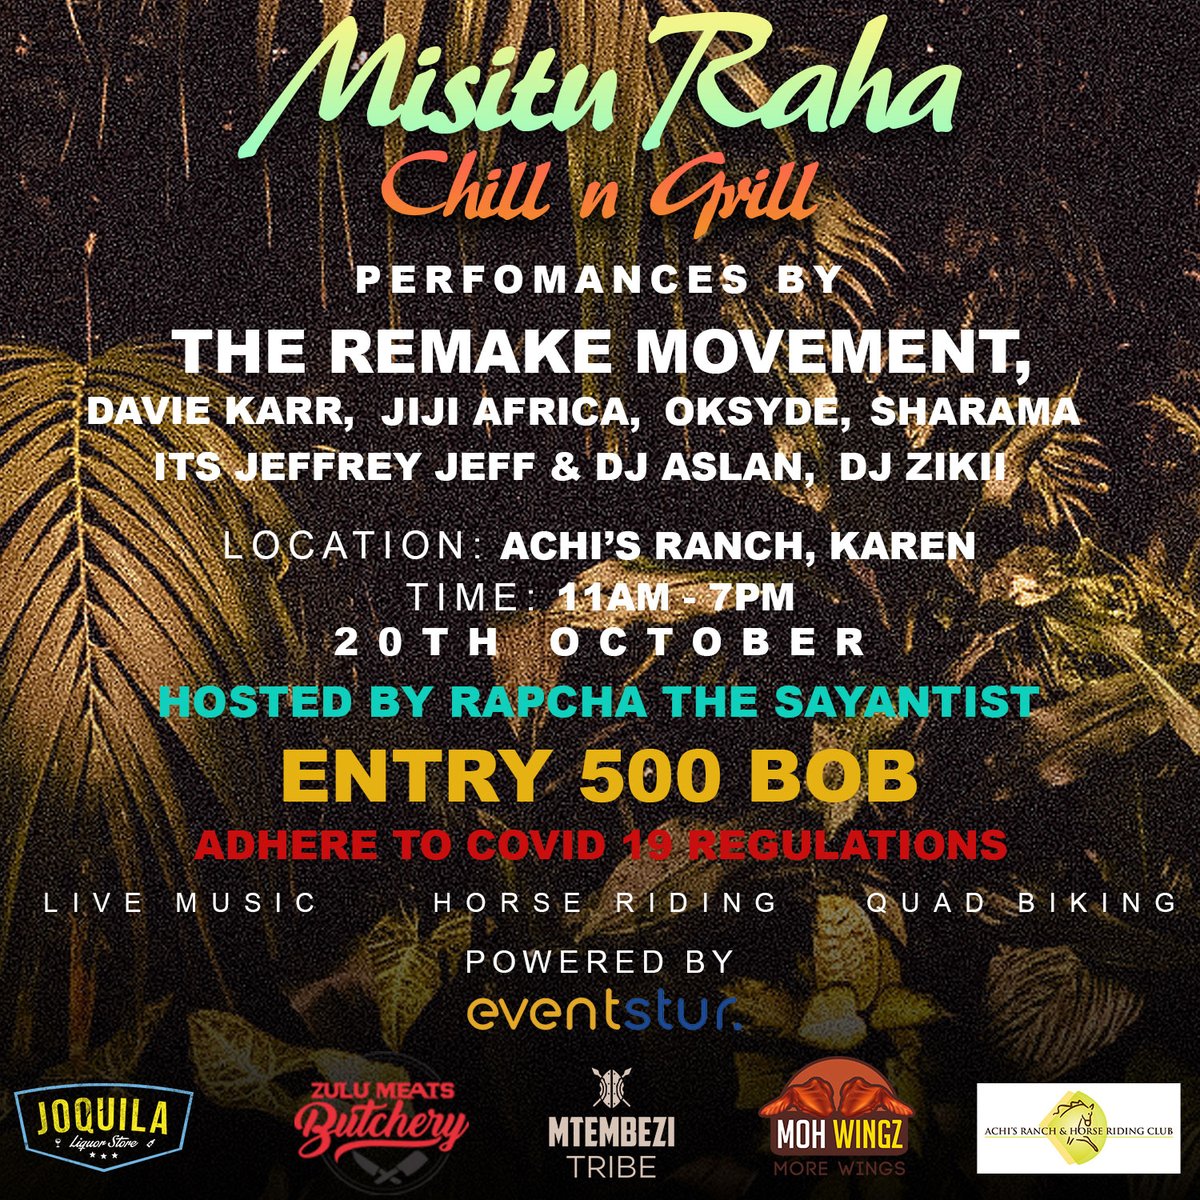 If you already have the Eventstur app on your phone you can click on Nairobi as your location on your homepage, go to Entertainment category and you will see  #MisituRahaChillNGrill with full details and where you can get your ticket. Easy and convenient.